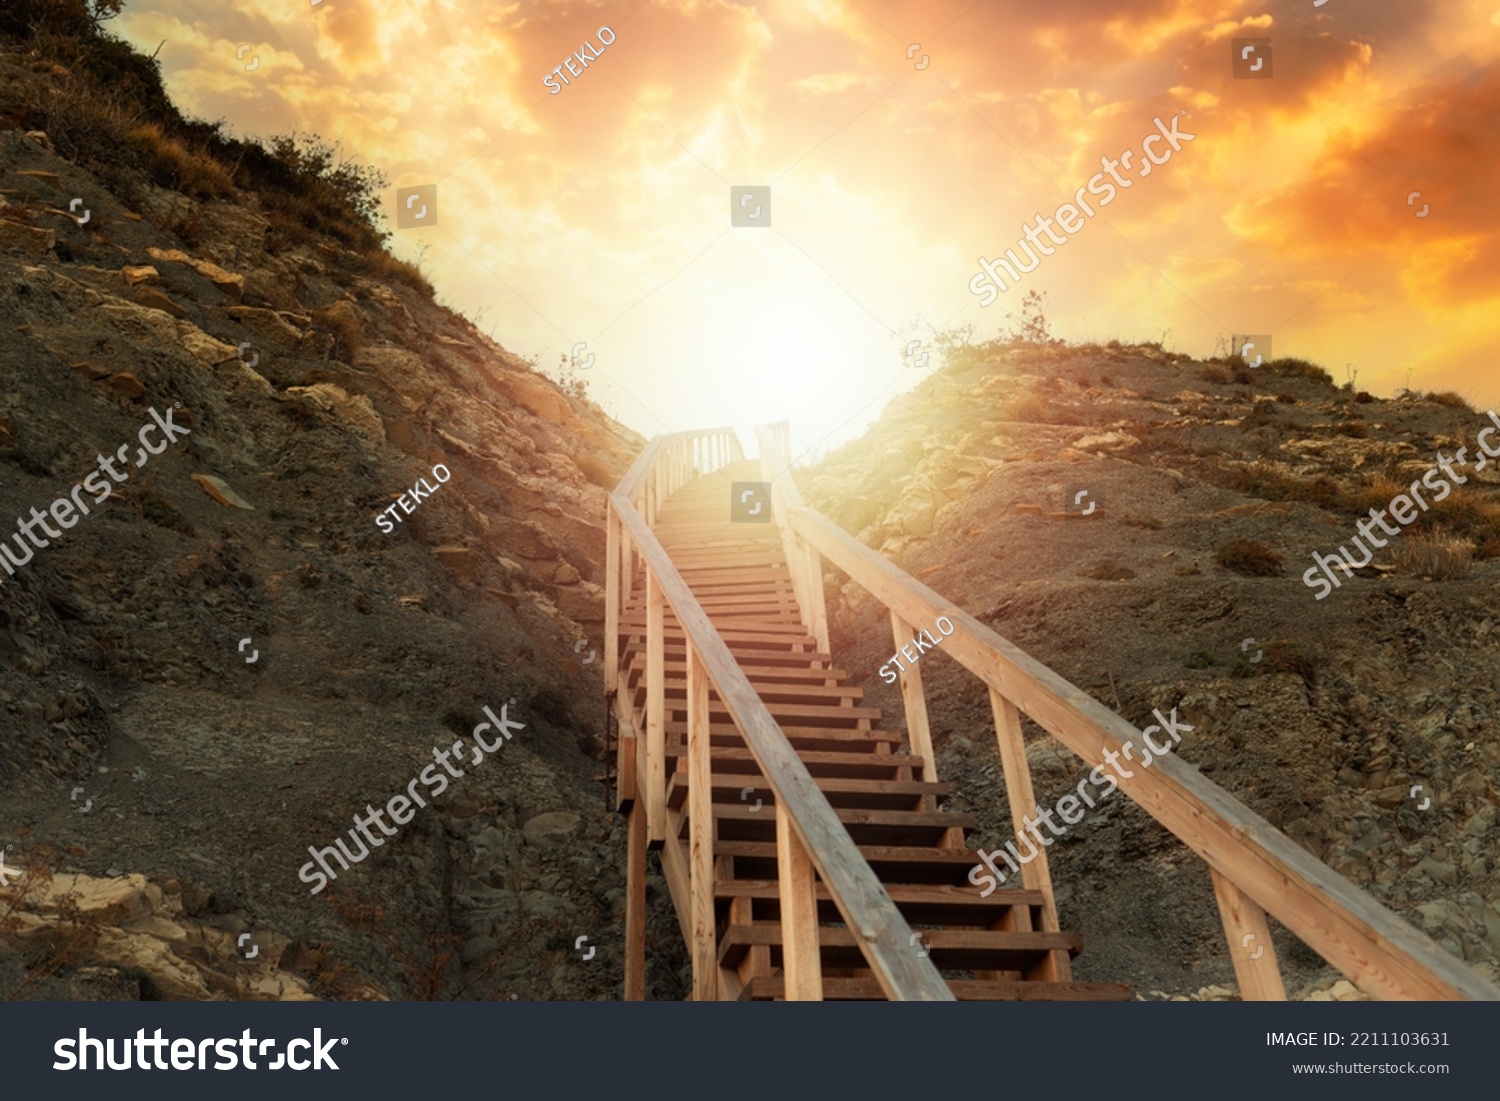 Religion and motivation. A wooden steep staircase in the mountain leading to the sky, with bright sunlight and sunset. Bottom view. The concept of paradise, victory and hope for a bright future. #2211103631